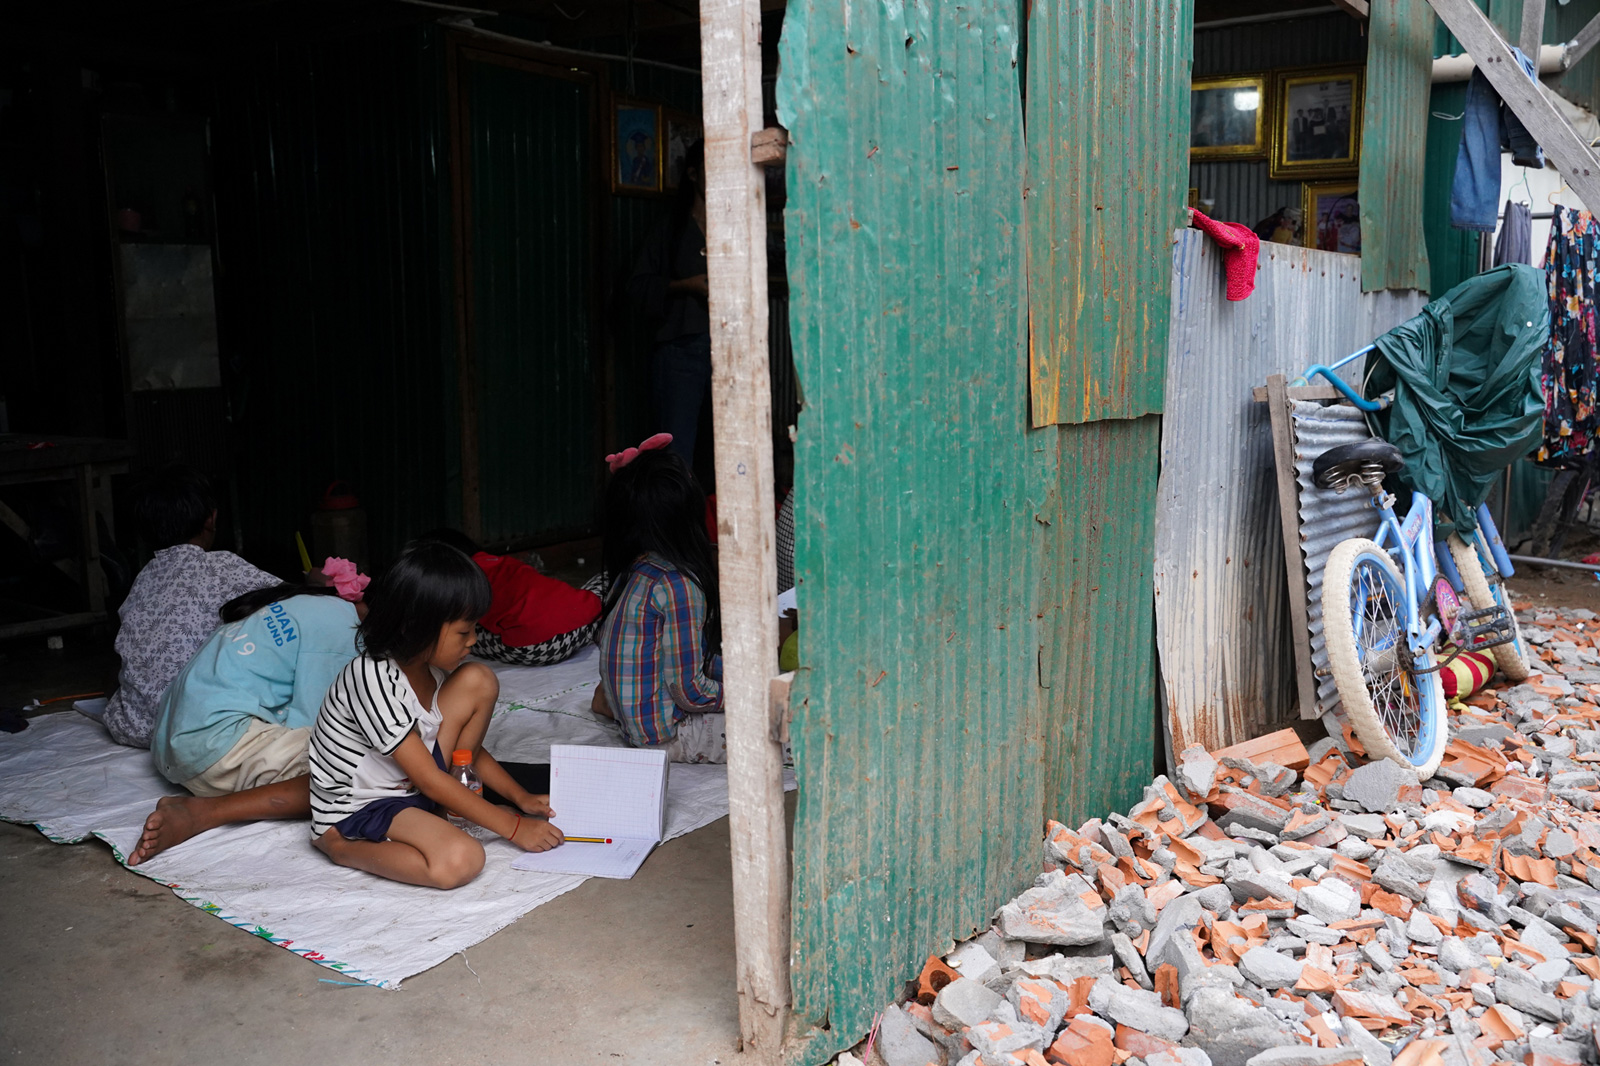 Children in Phnom Penh’s Stung Meanchey District study under neighbours’ homes while some schools remain closed due to the coronavirus pandemic.